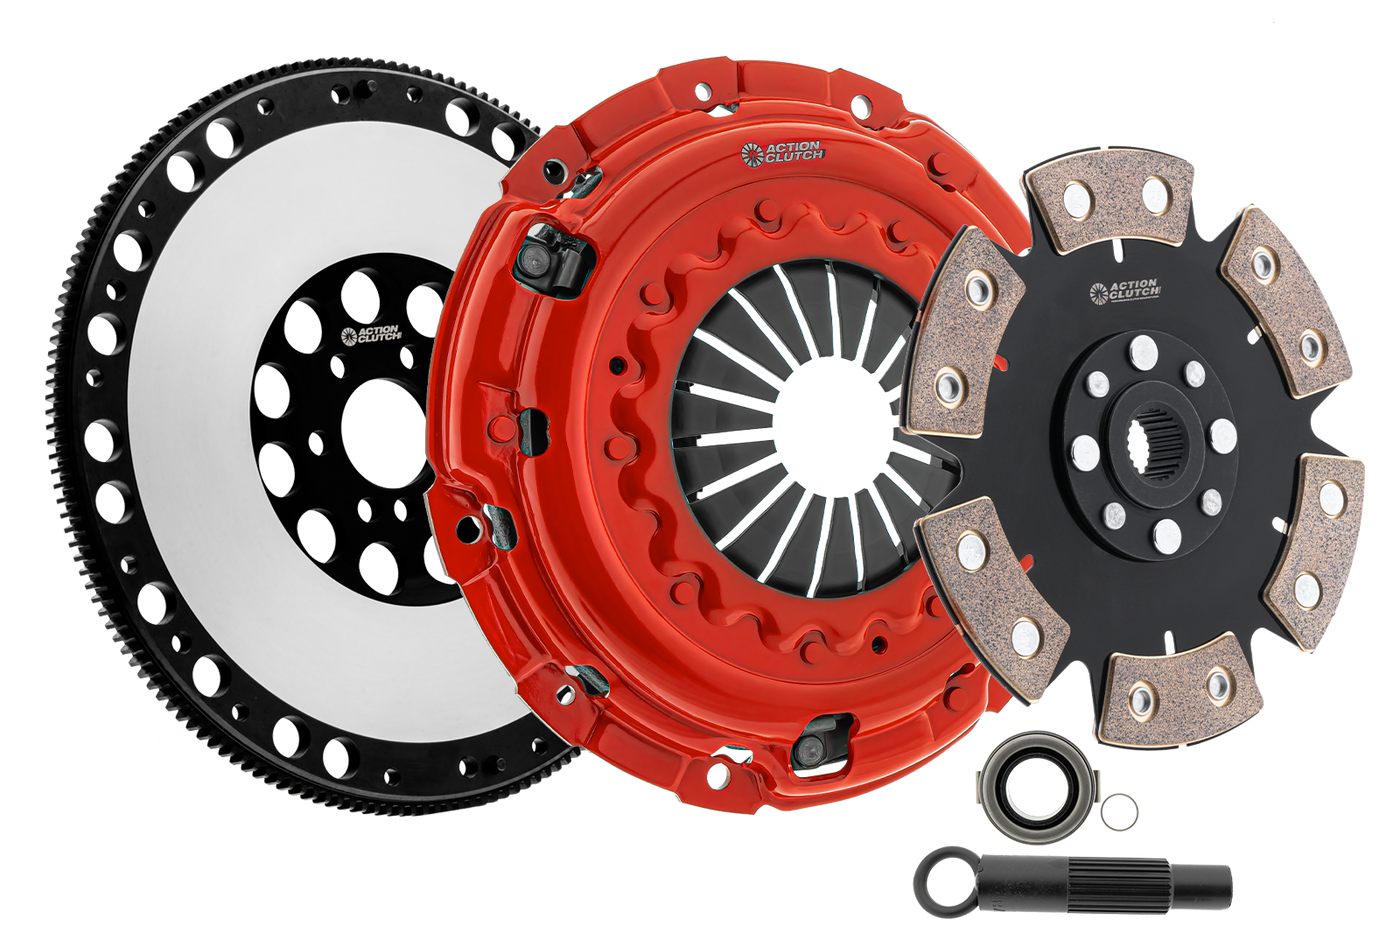 Stage 4 Clutch Kit (1MD) for BMW 325 1987-1988 2.7L (M20B27) Includes Lightened Flywheel